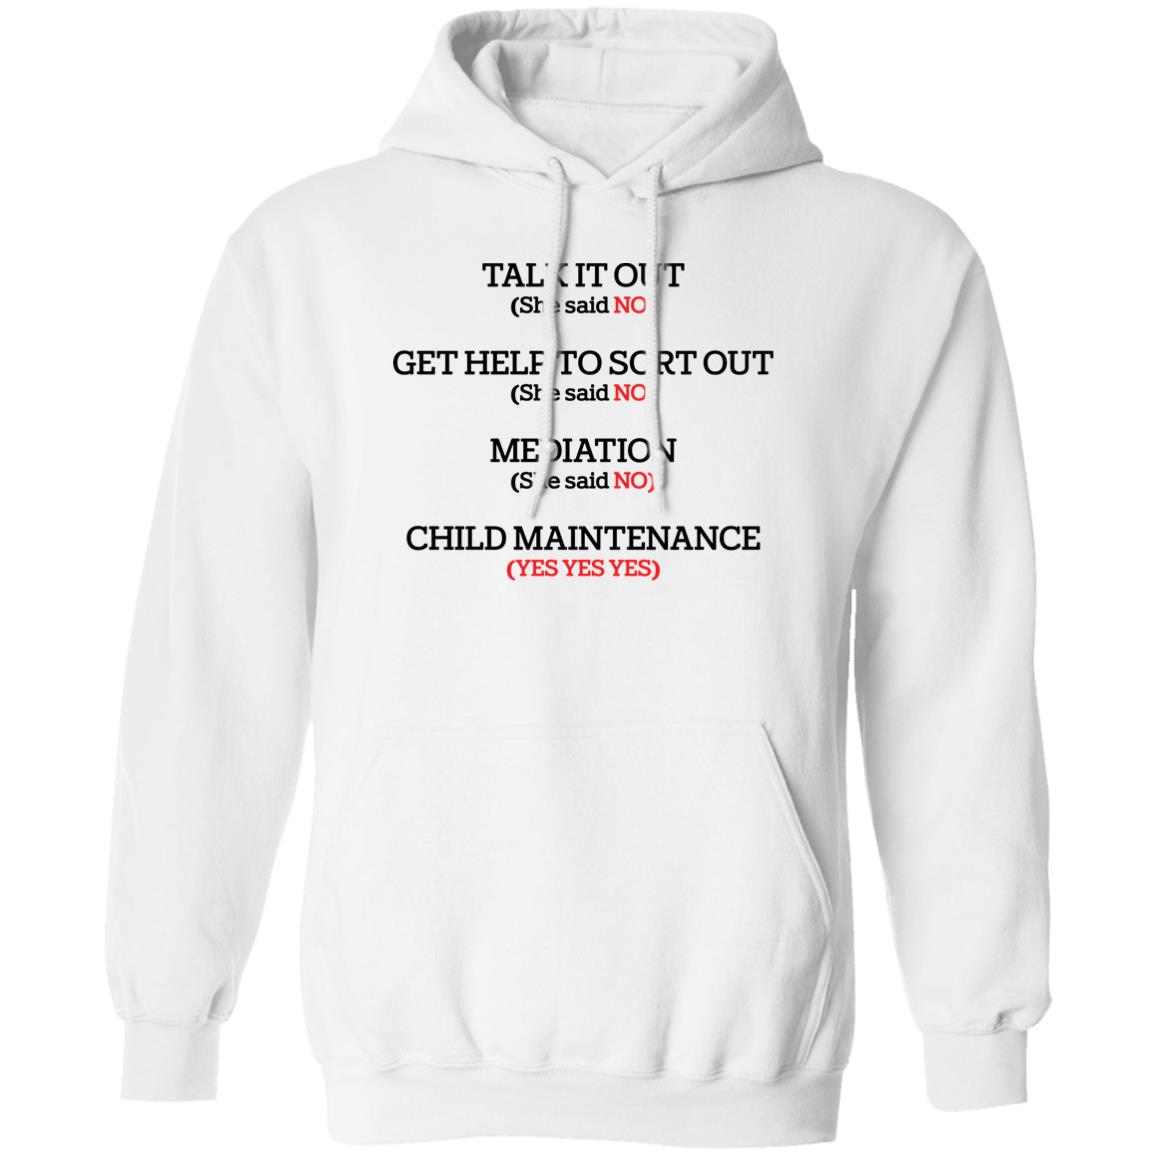 Talk It Out Get Help To Sort Out Mediation Child Maintenance Shirt 1